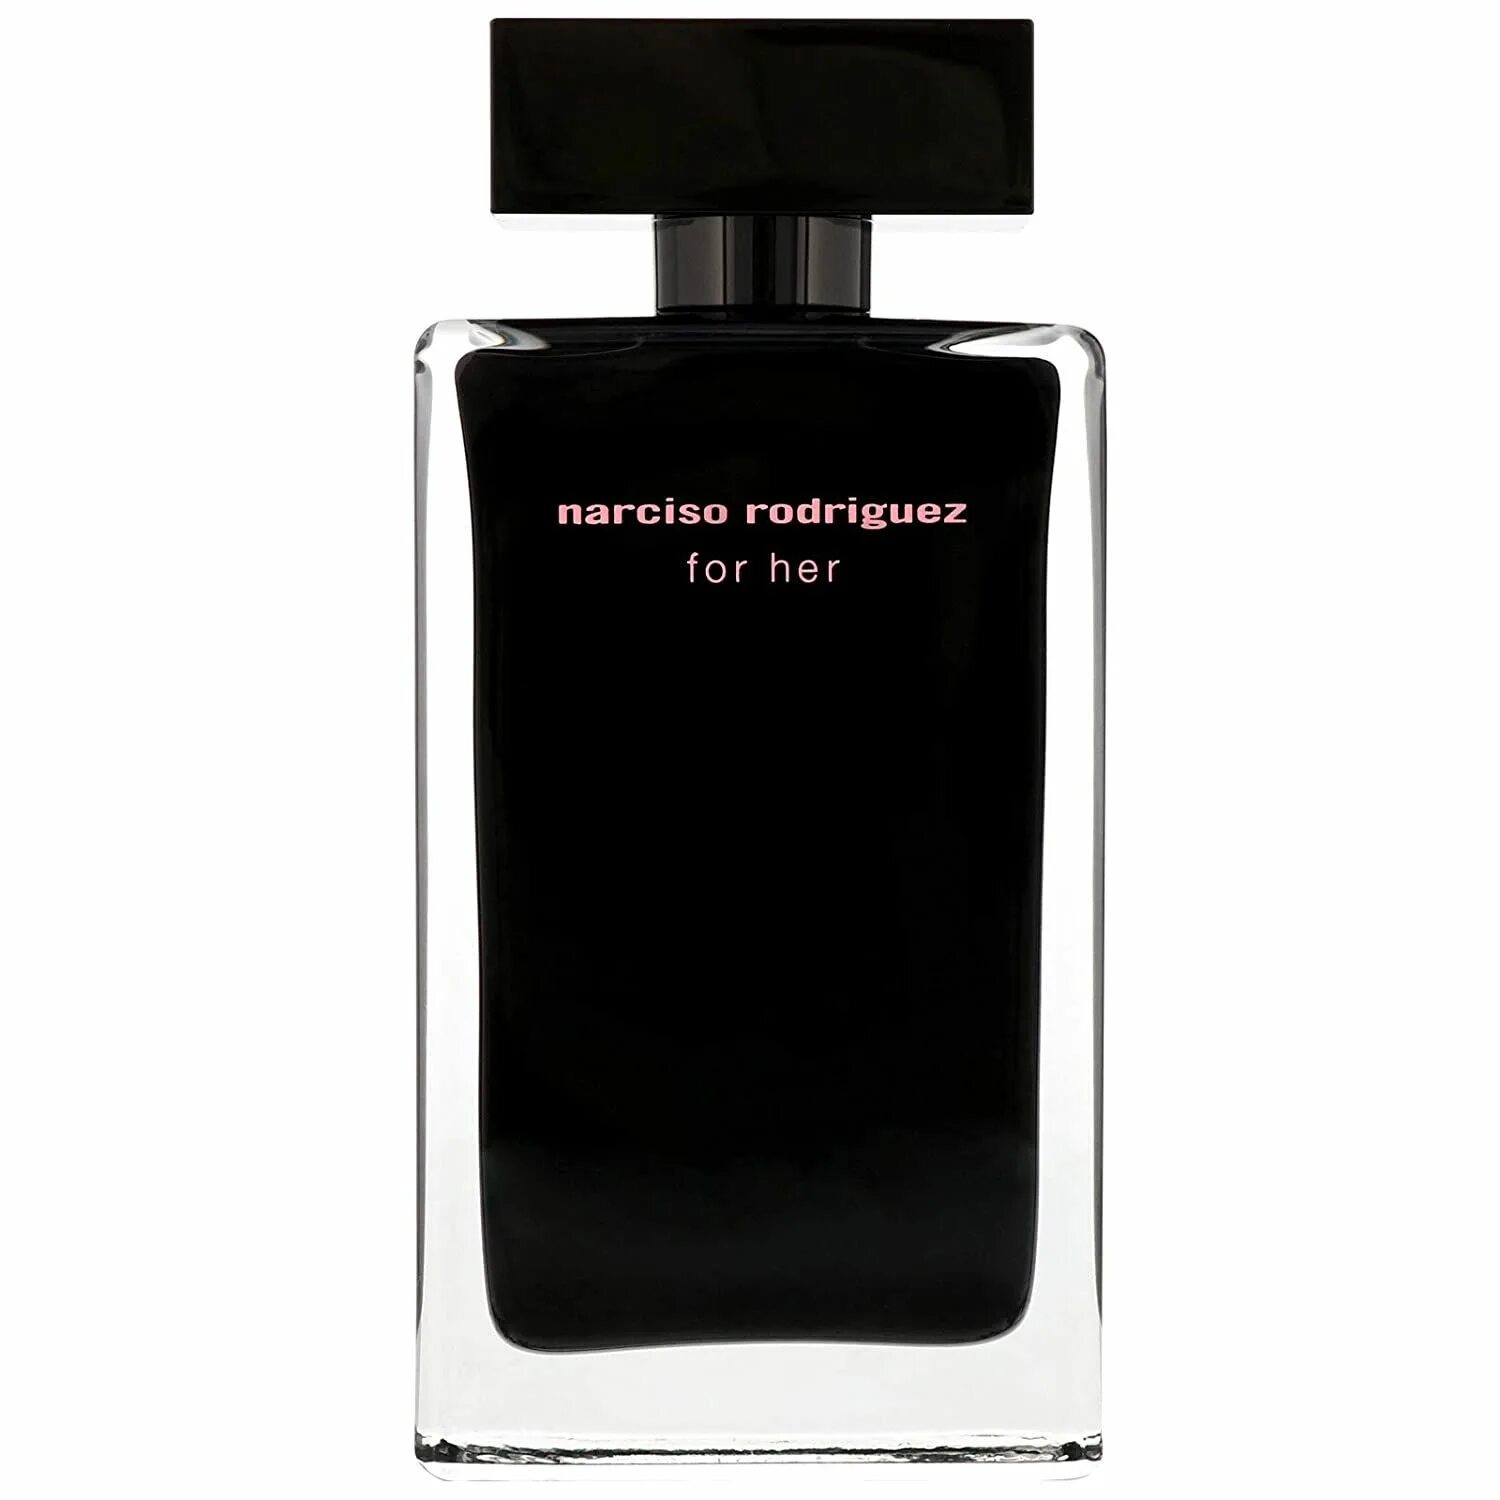 Родригес духи отзывы. Духи Narciso Rodriguez. Narciso Rodriguez for her EDT L 30ml. Духи Narciso Rodriguez for her. Narciso Rodriguez for her Eau de Toilette 3.3 FL.oz. 100 Ml.